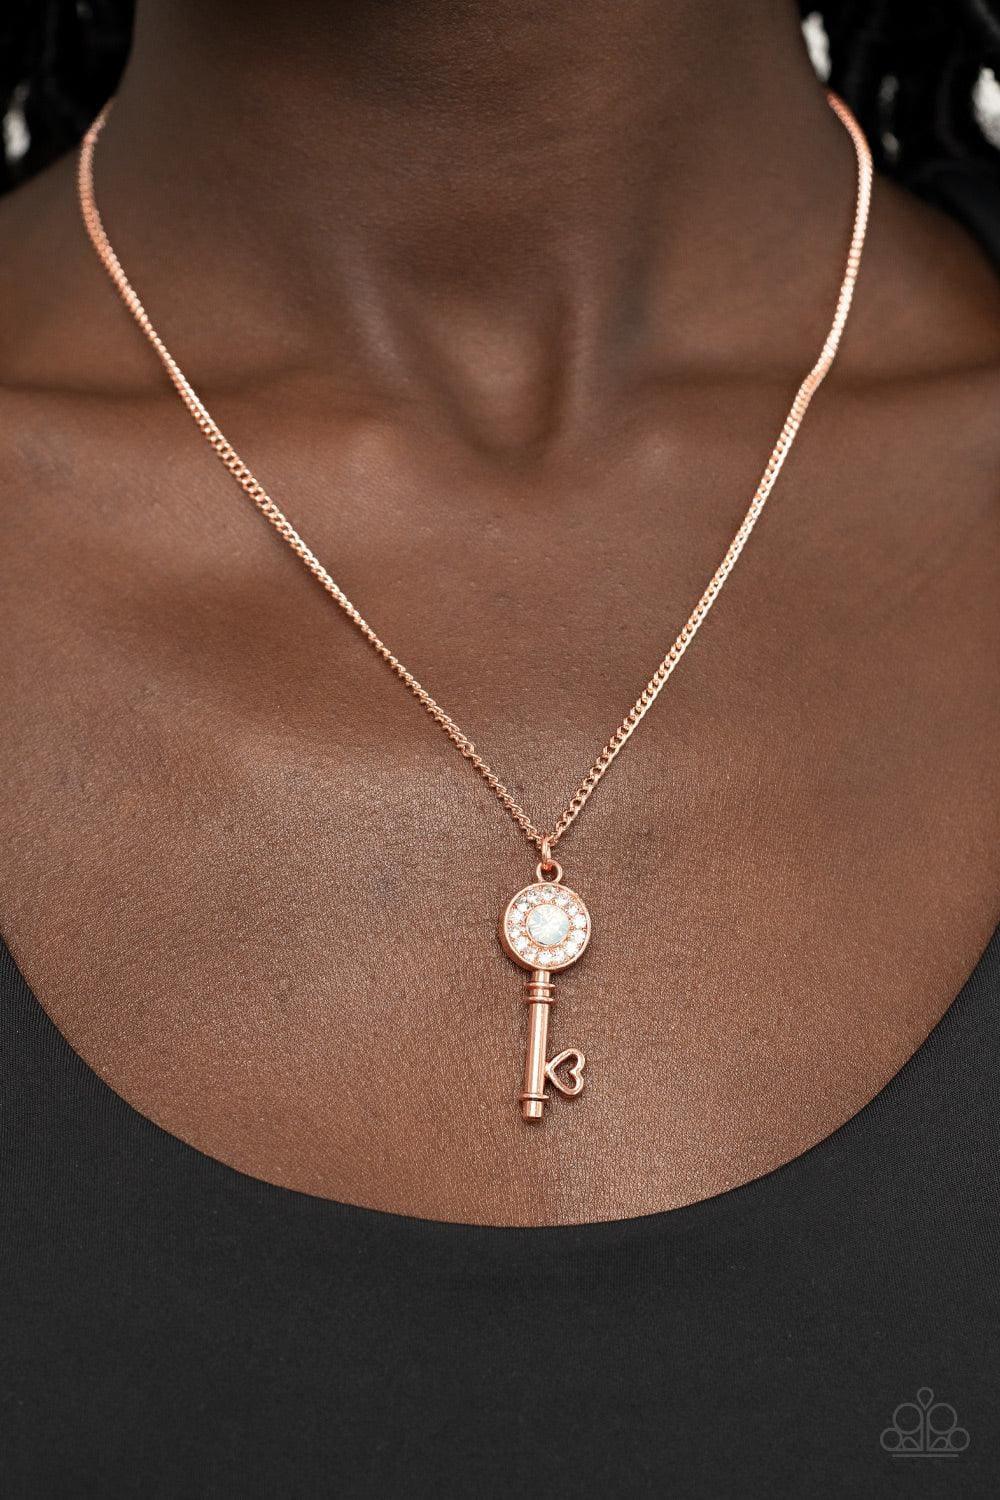 Paparazzi Accessories - Prized Key Player - Copper Necklace - Bling by JessieK